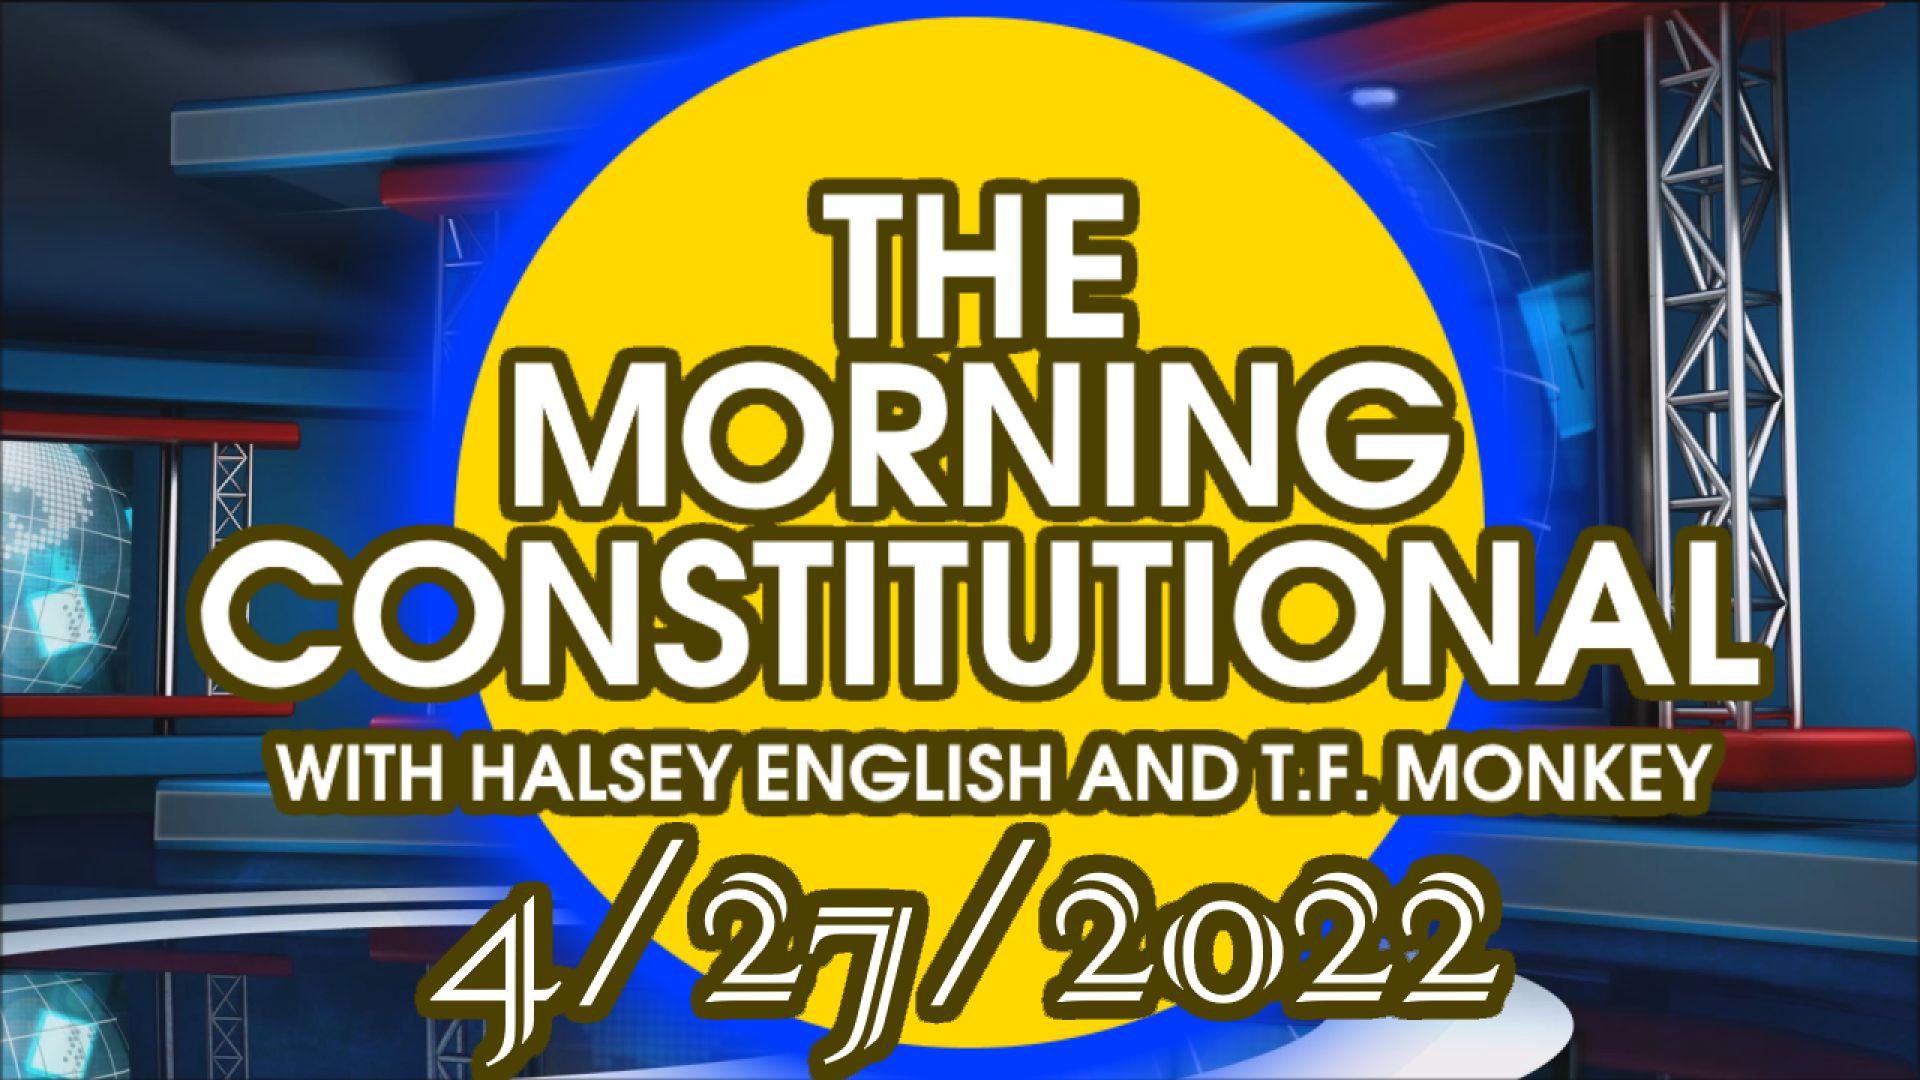 The Morning Constitutional: 4/27/2022